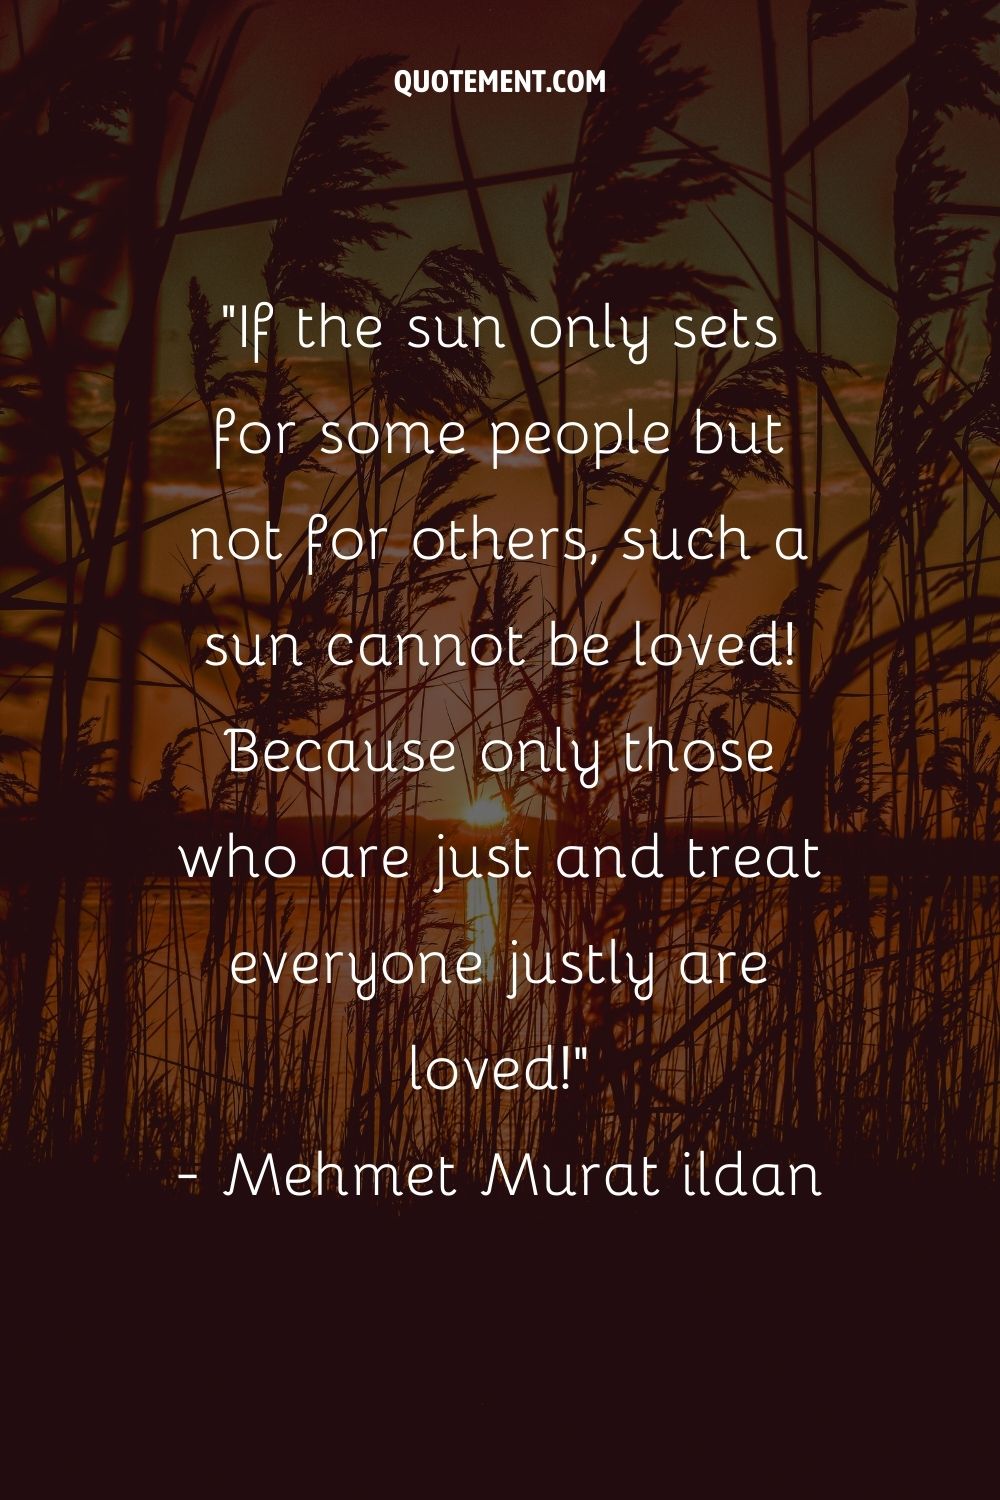 If the sun only sets for some people but not for others, such a sun cannot be loved! Because only those who are just and treat everyone justly are loved